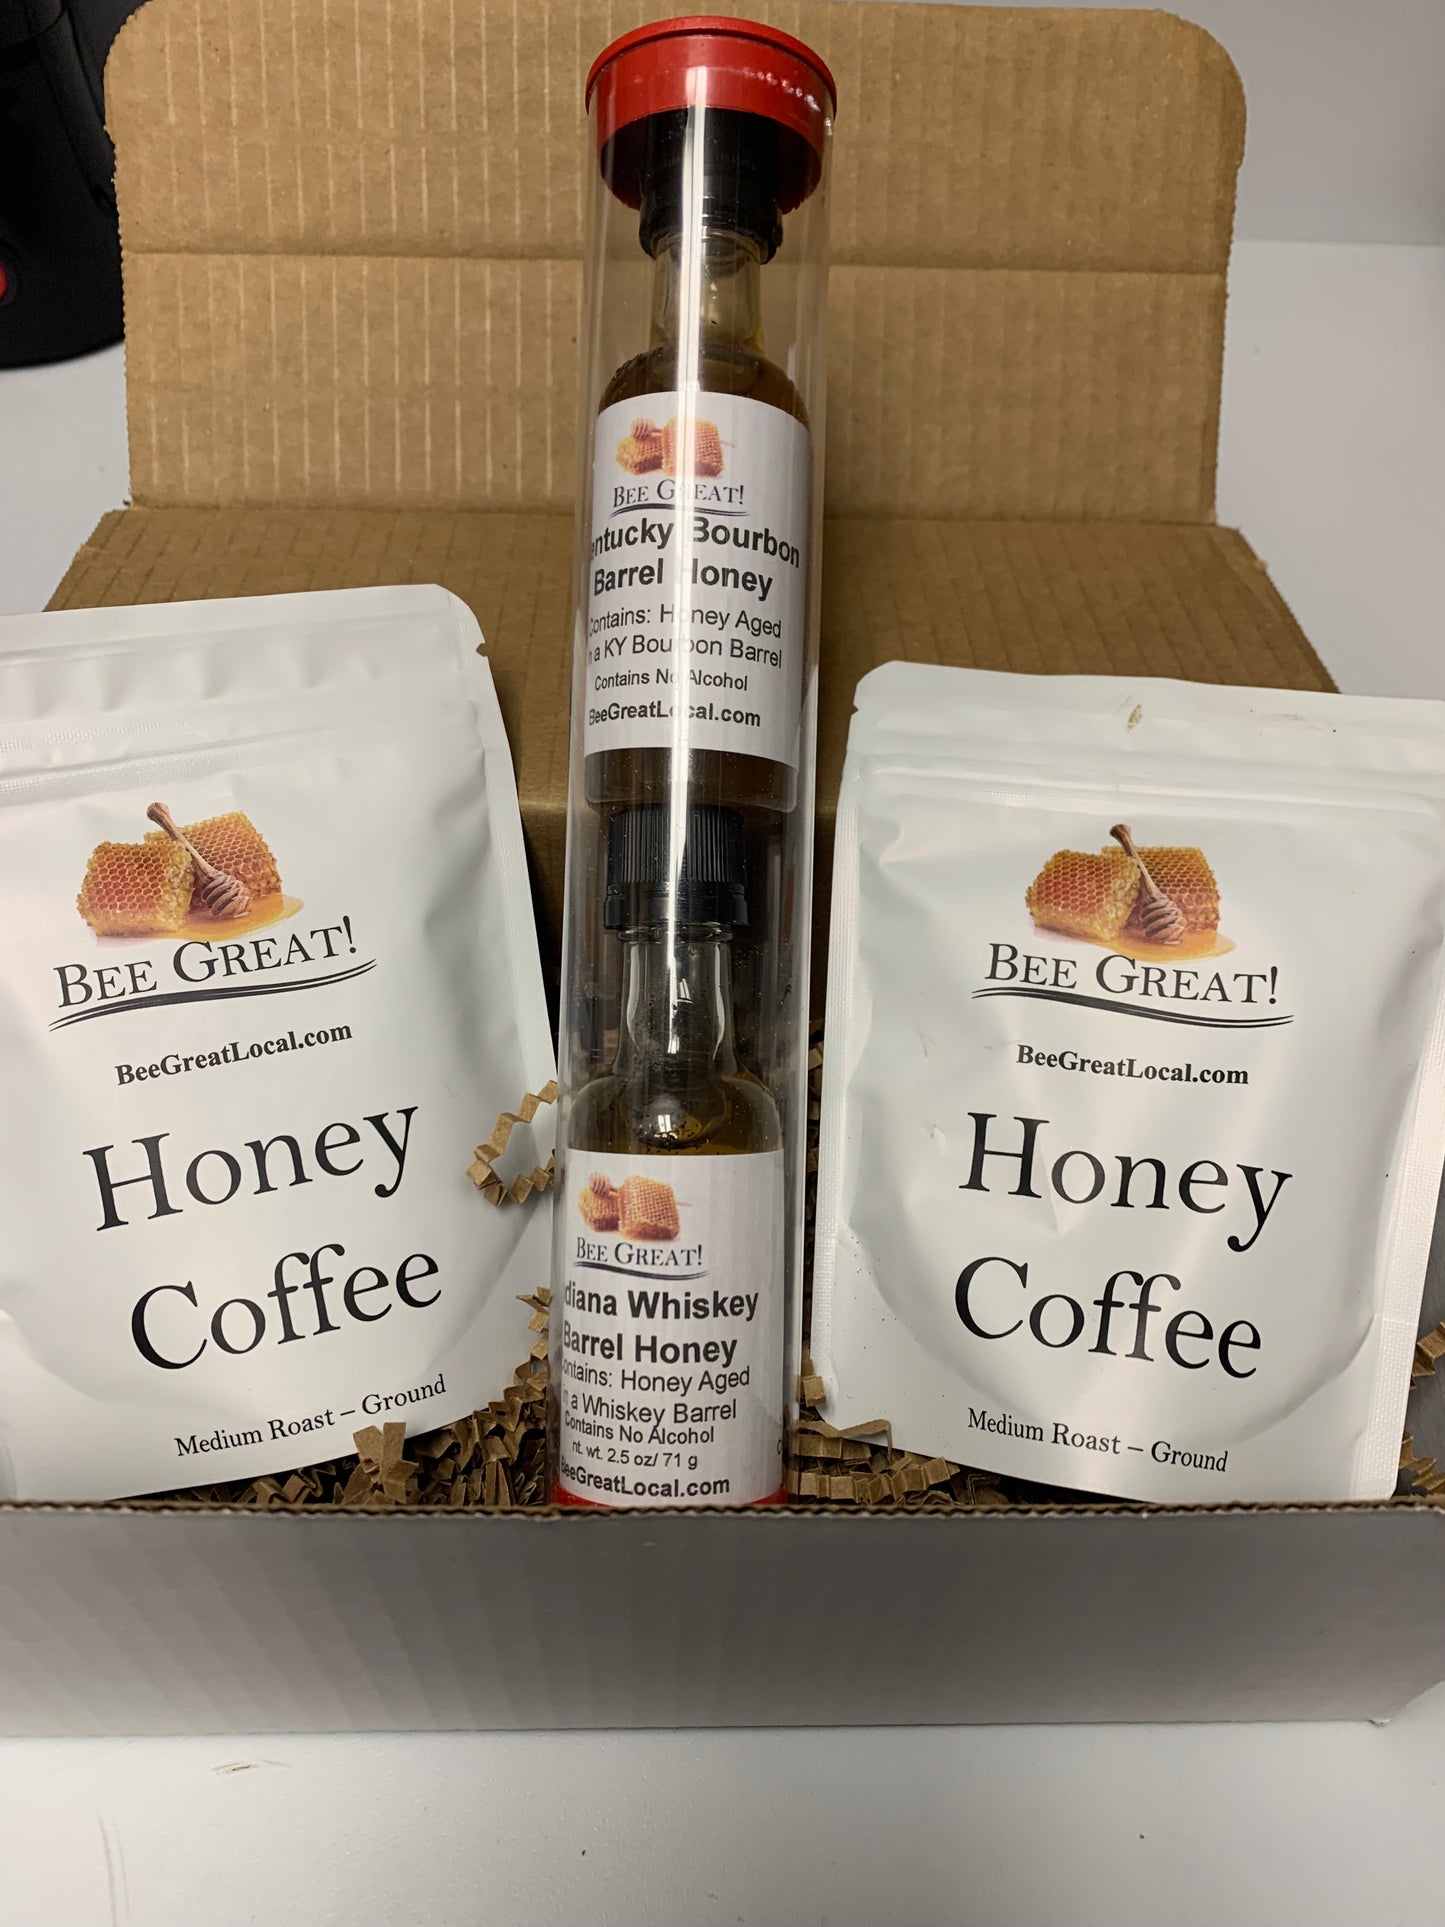 Coffee Lover’s Gift Box